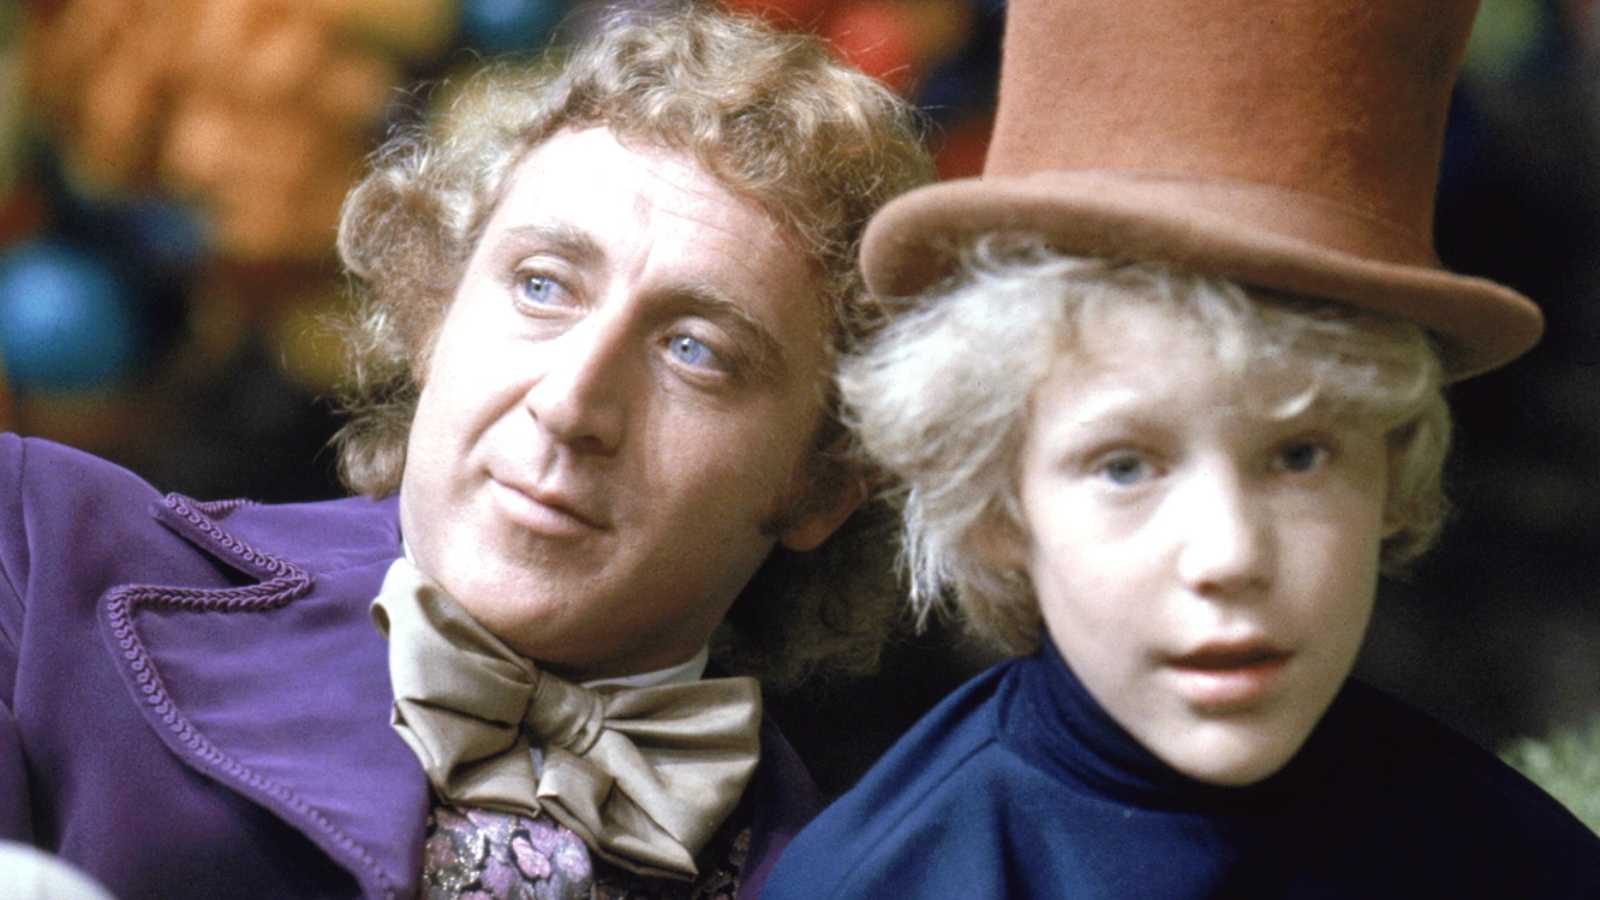 Peter Ostrum in Willy Wonka & the Chocolate Factory (1971)